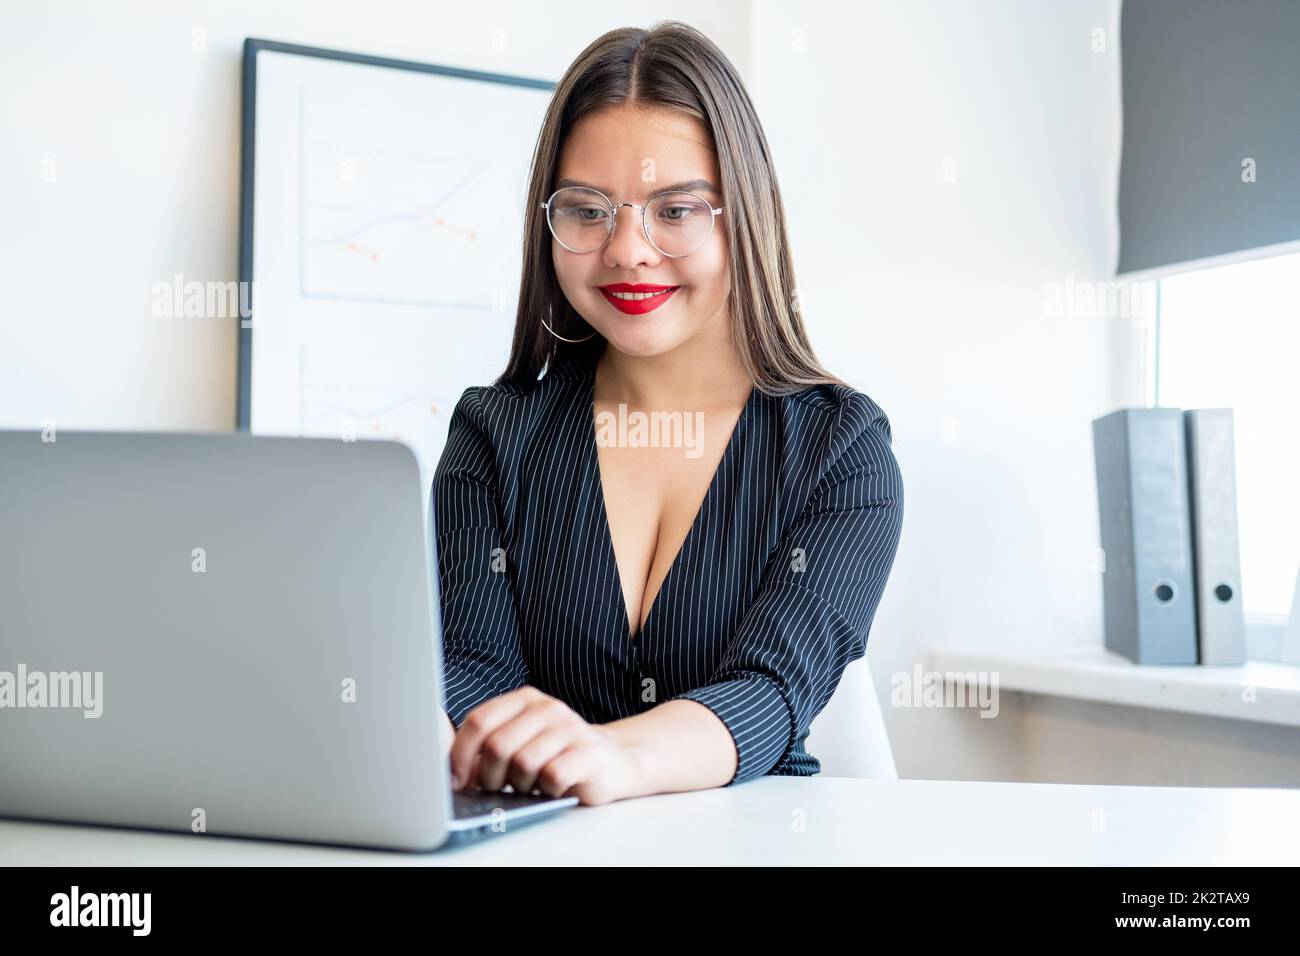 Business woman lifestyle. Successful career. Project management. Corporate chat. Cheerful confident smart lady in glasses working on project with lapt Stock Photo